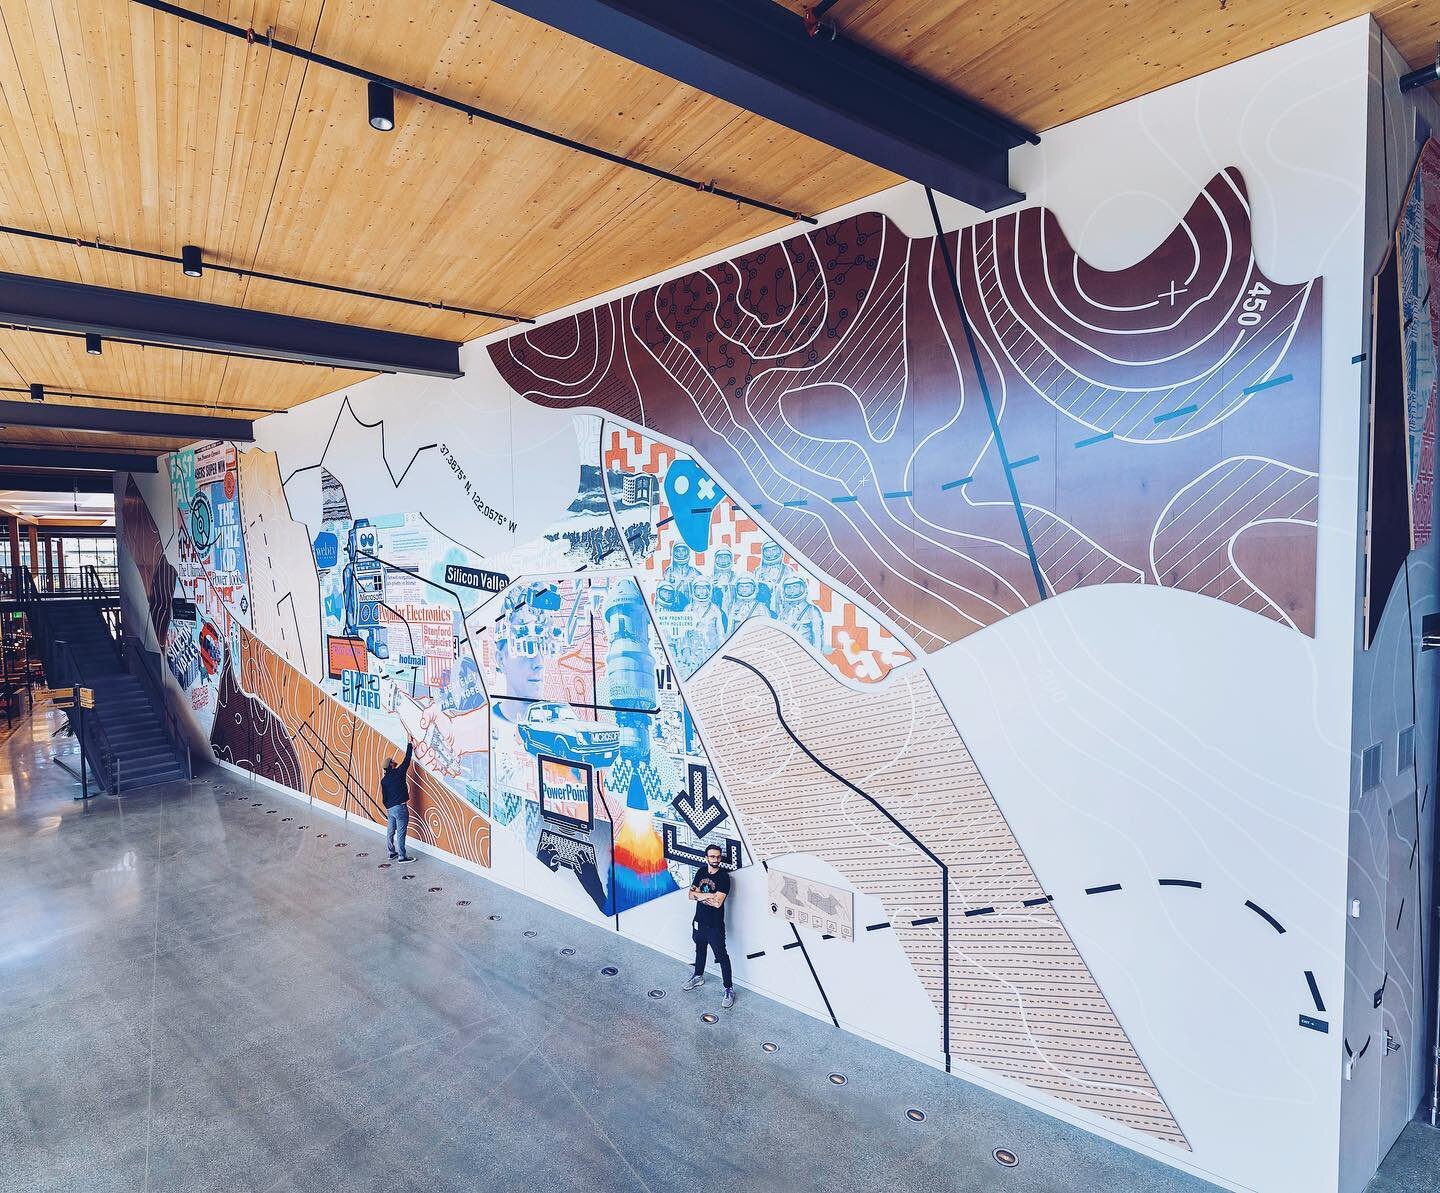 It is by learning from our past that we can confidently look to the future. Recent multi-media mural created in collaboration with the archivist of Microsoft Silicon Valley. 

Designed in collaboration with @sean_evergreen while at Acrylicize.